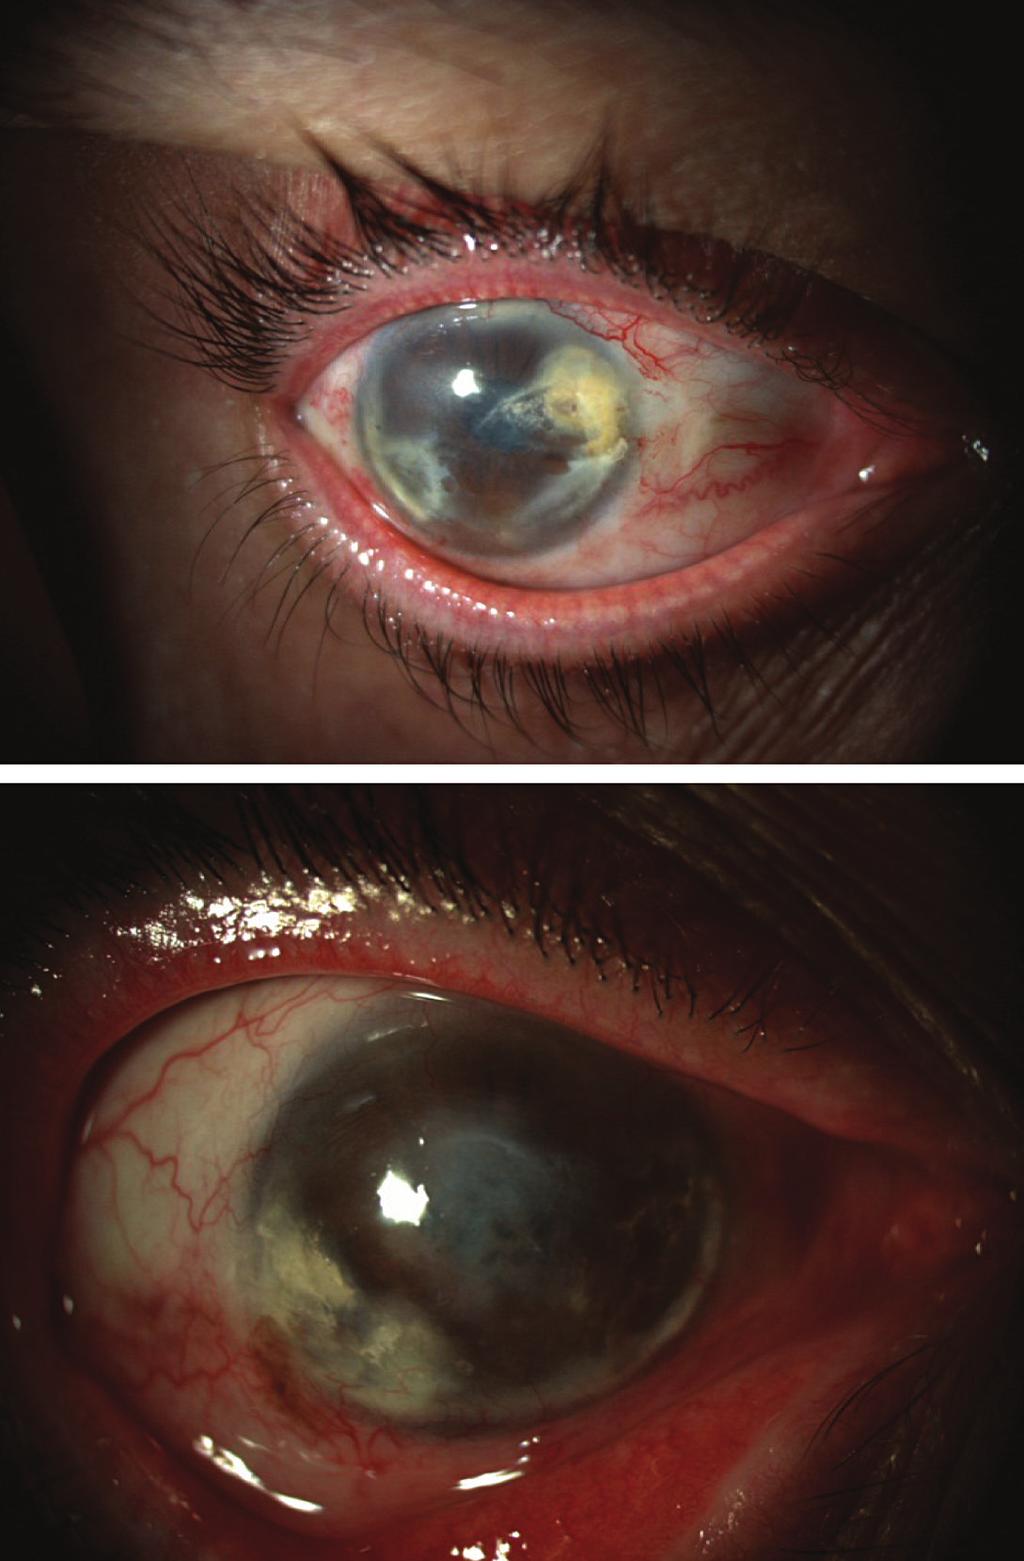 simultaneously addressing conjunctival, limbal, and corneal abnormalities.